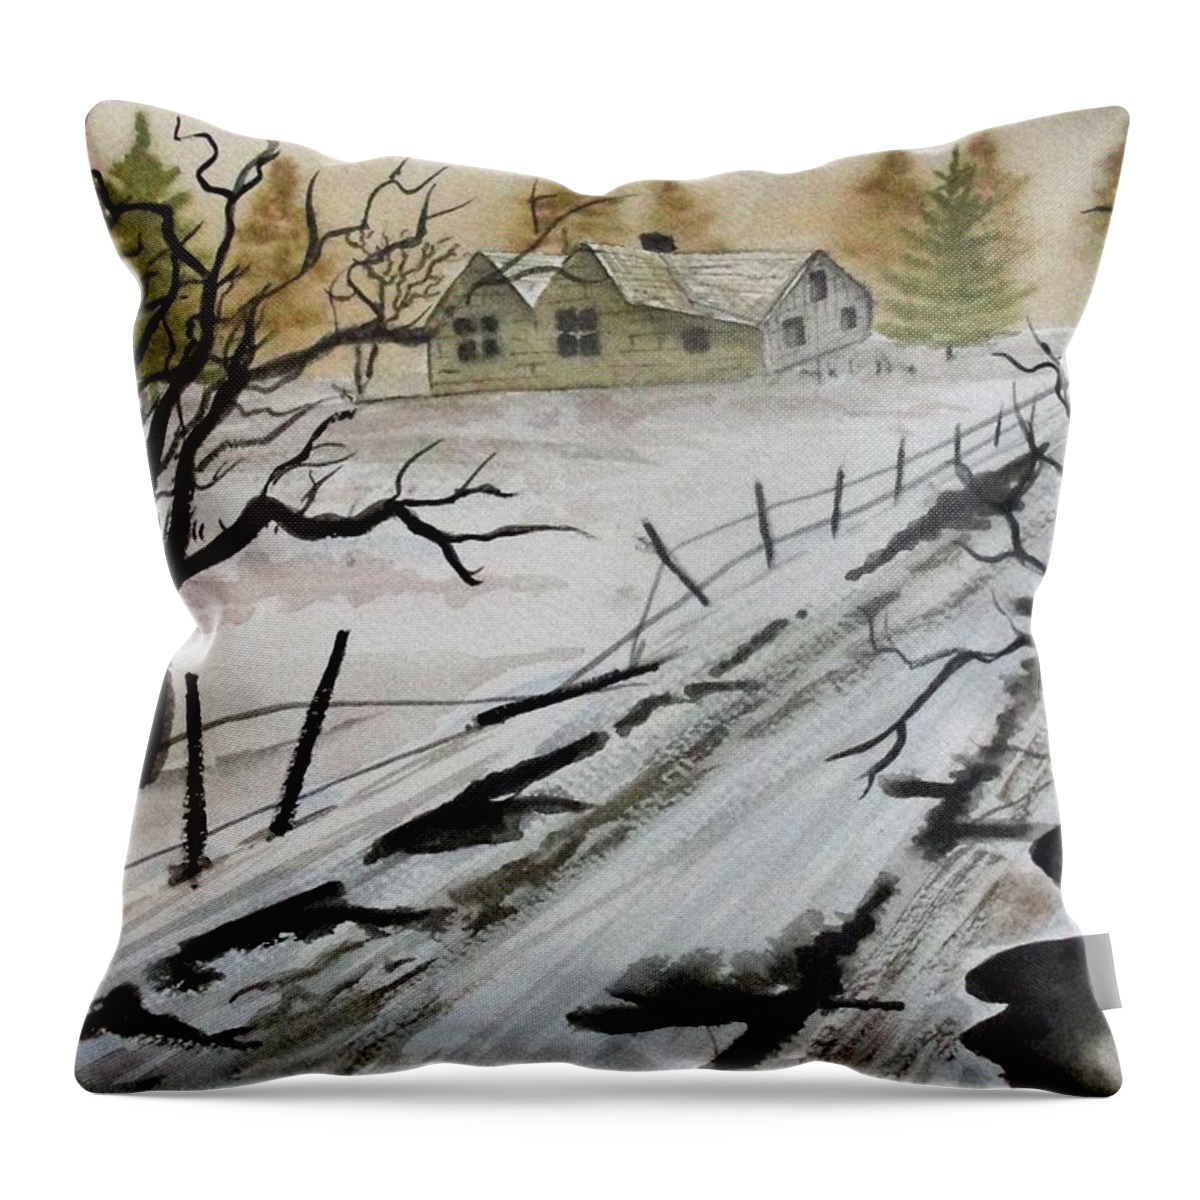 Building Throw Pillow featuring the painting Winter Farmhouse #1 by Jimmy Smith